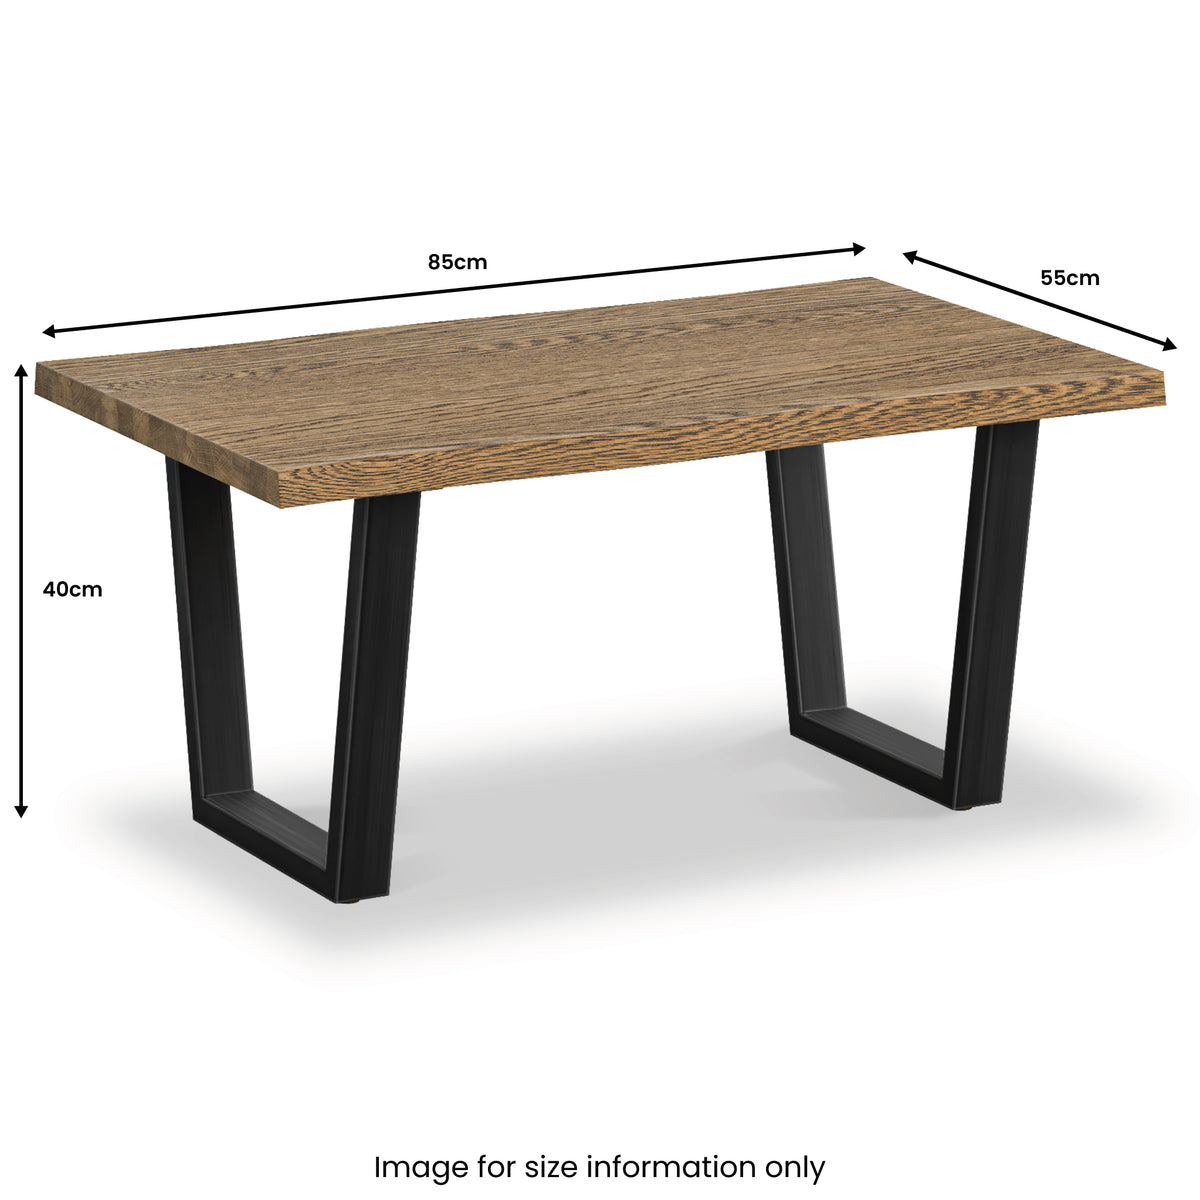 Isaac Oak Coffee Table dimensions